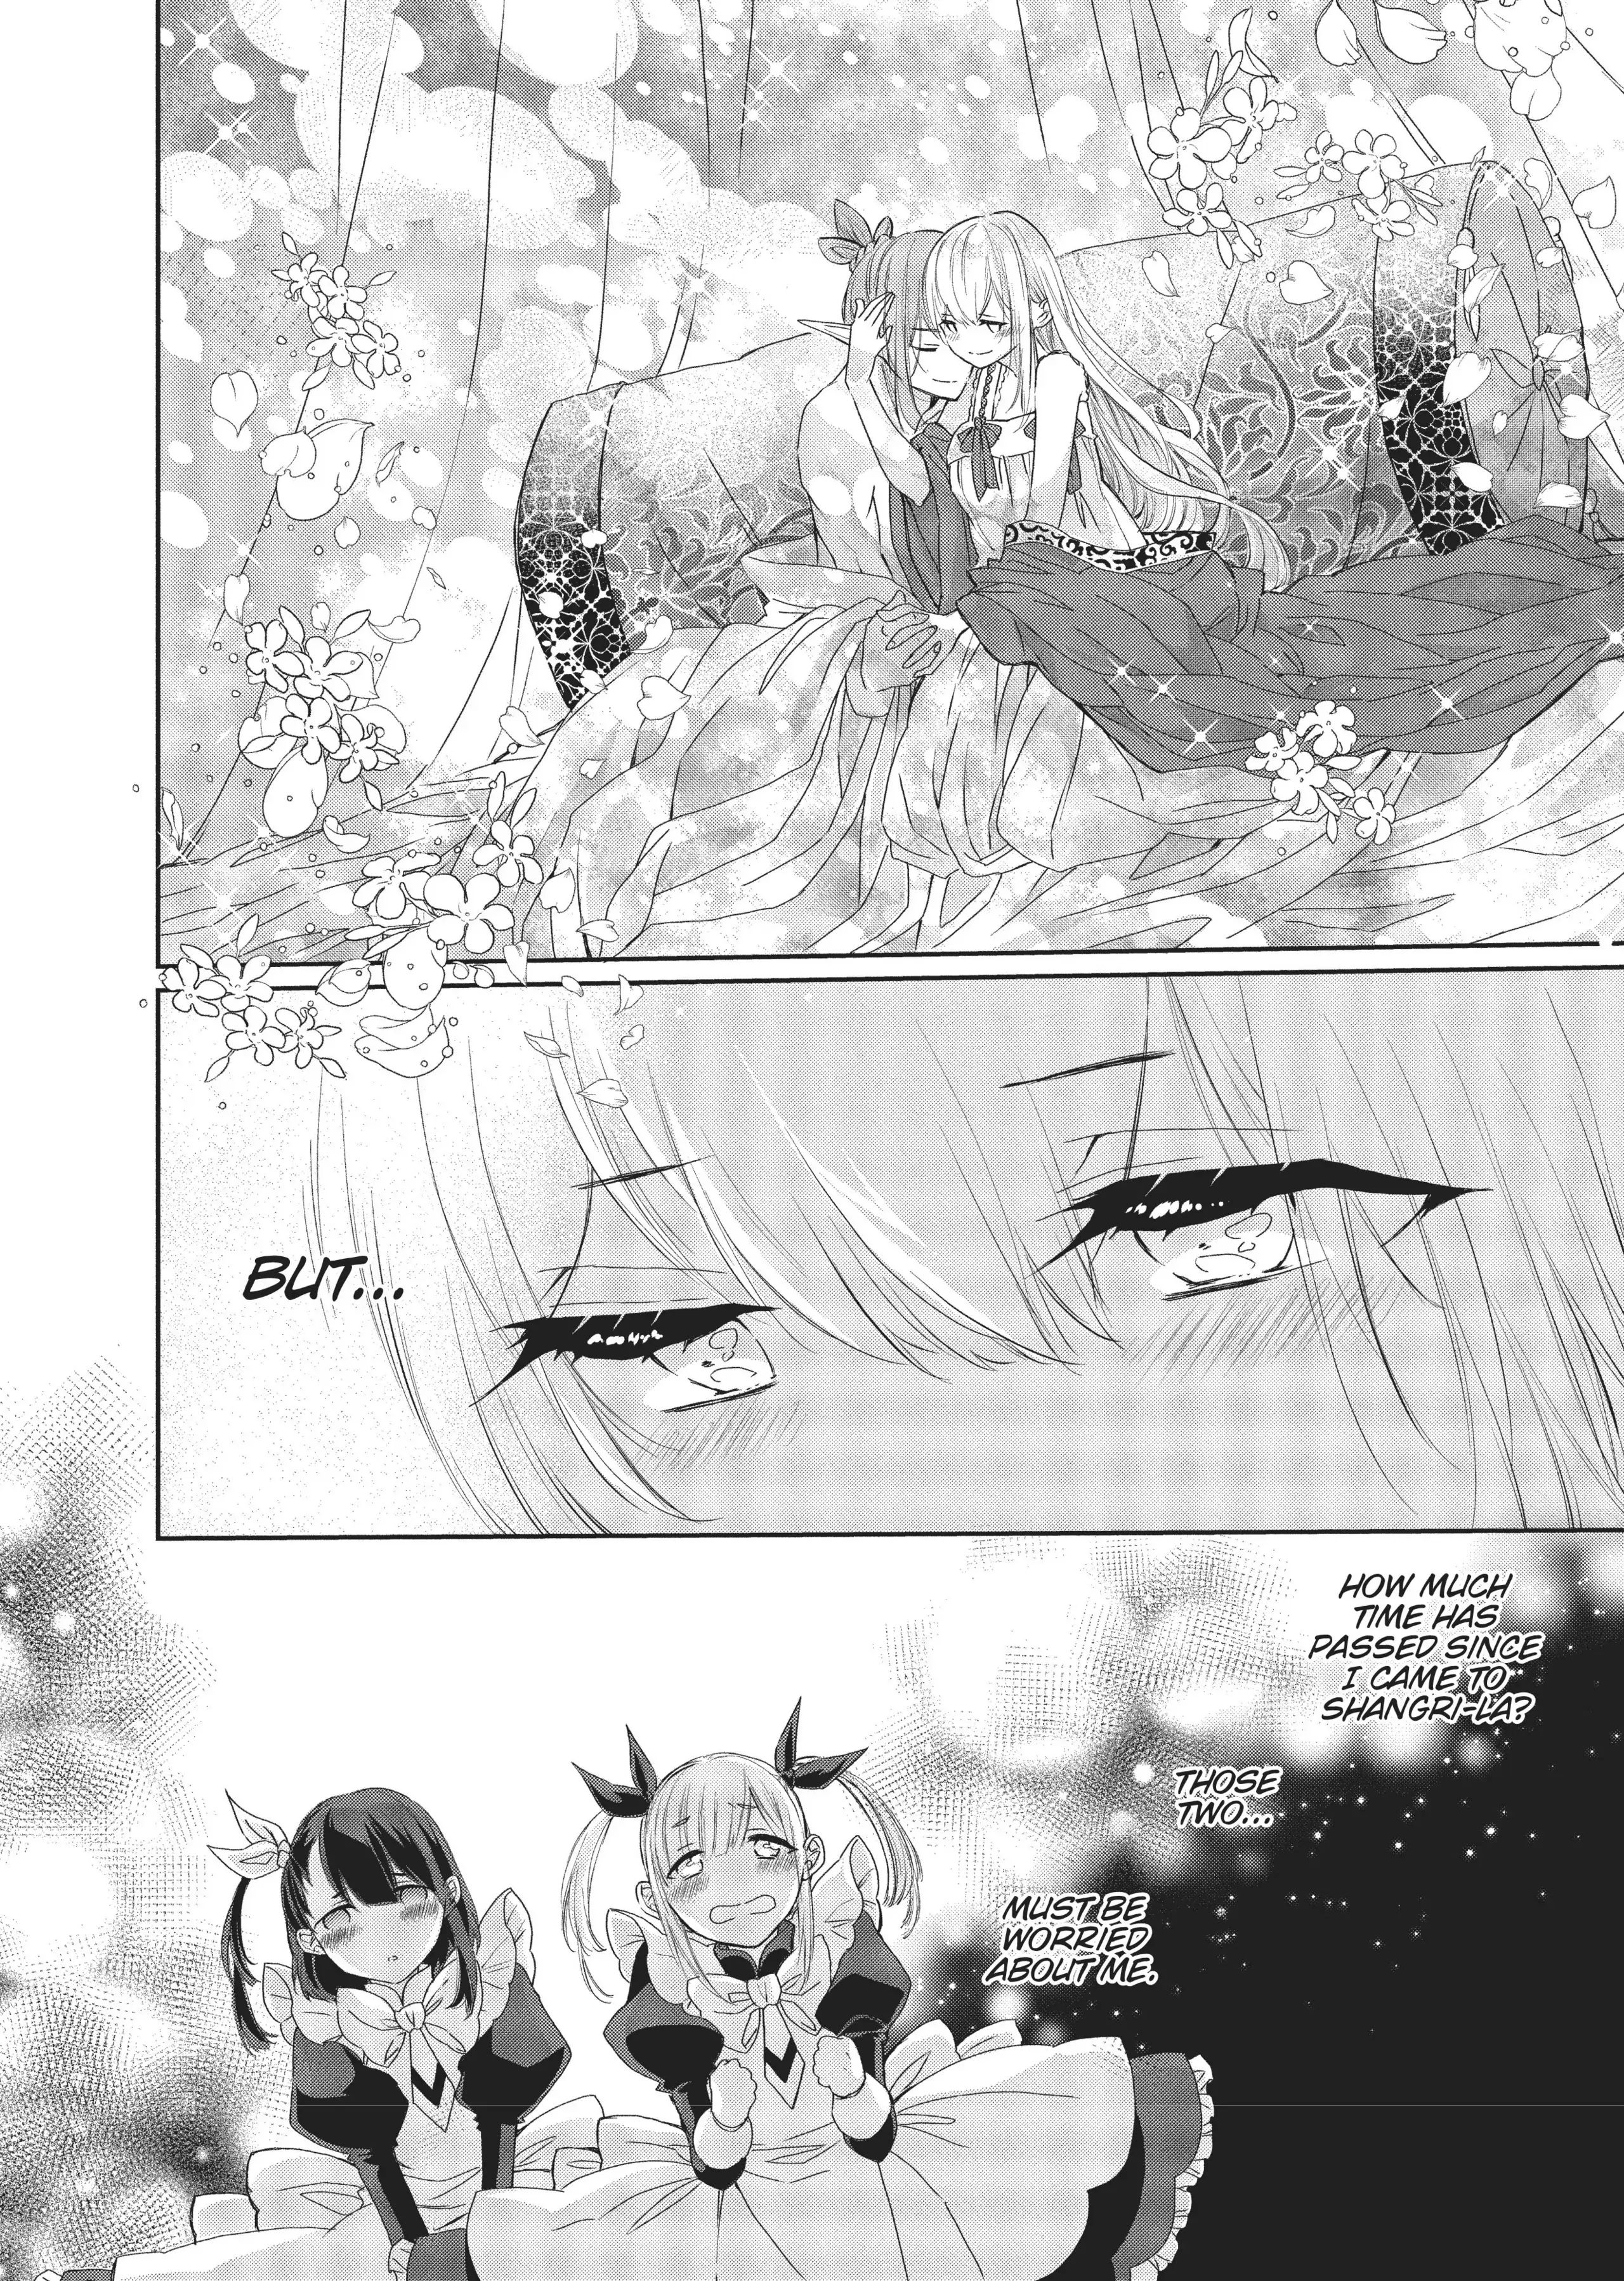 Outbride - Beauty and the Beasts - chapter 17.2 - #4